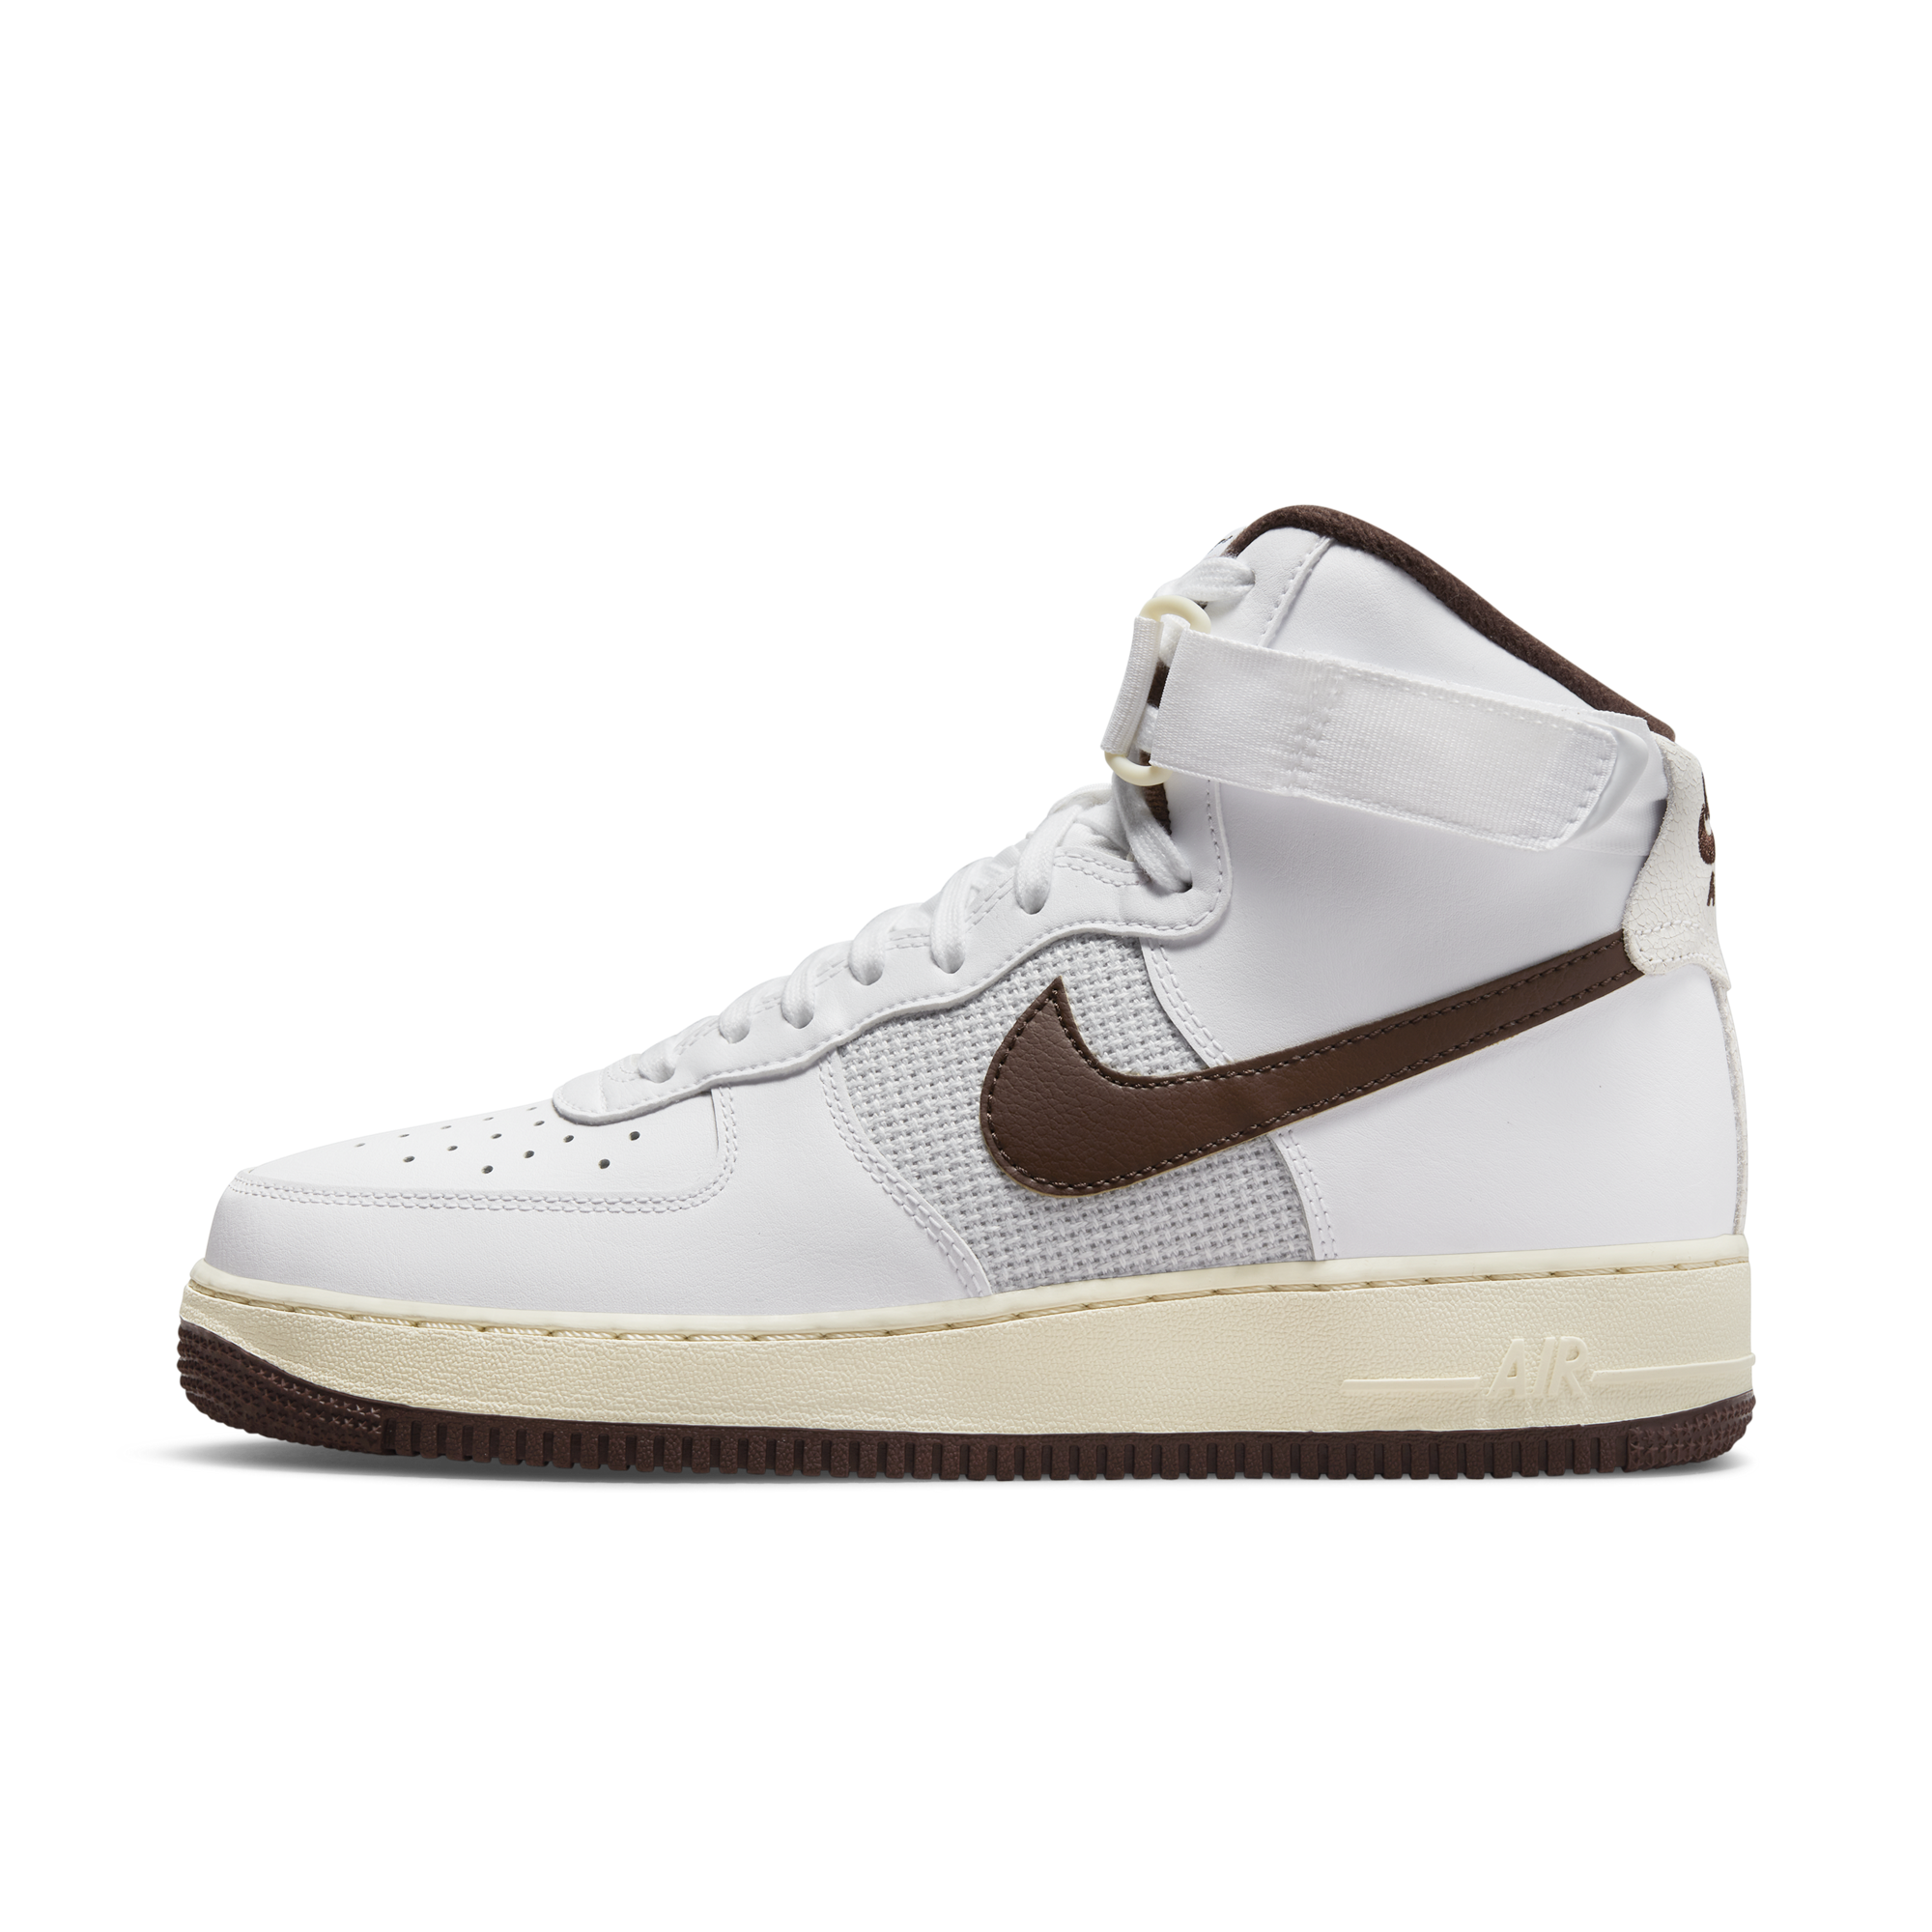 Nike Air Force 1 Force 1 High '07 - SoleFly